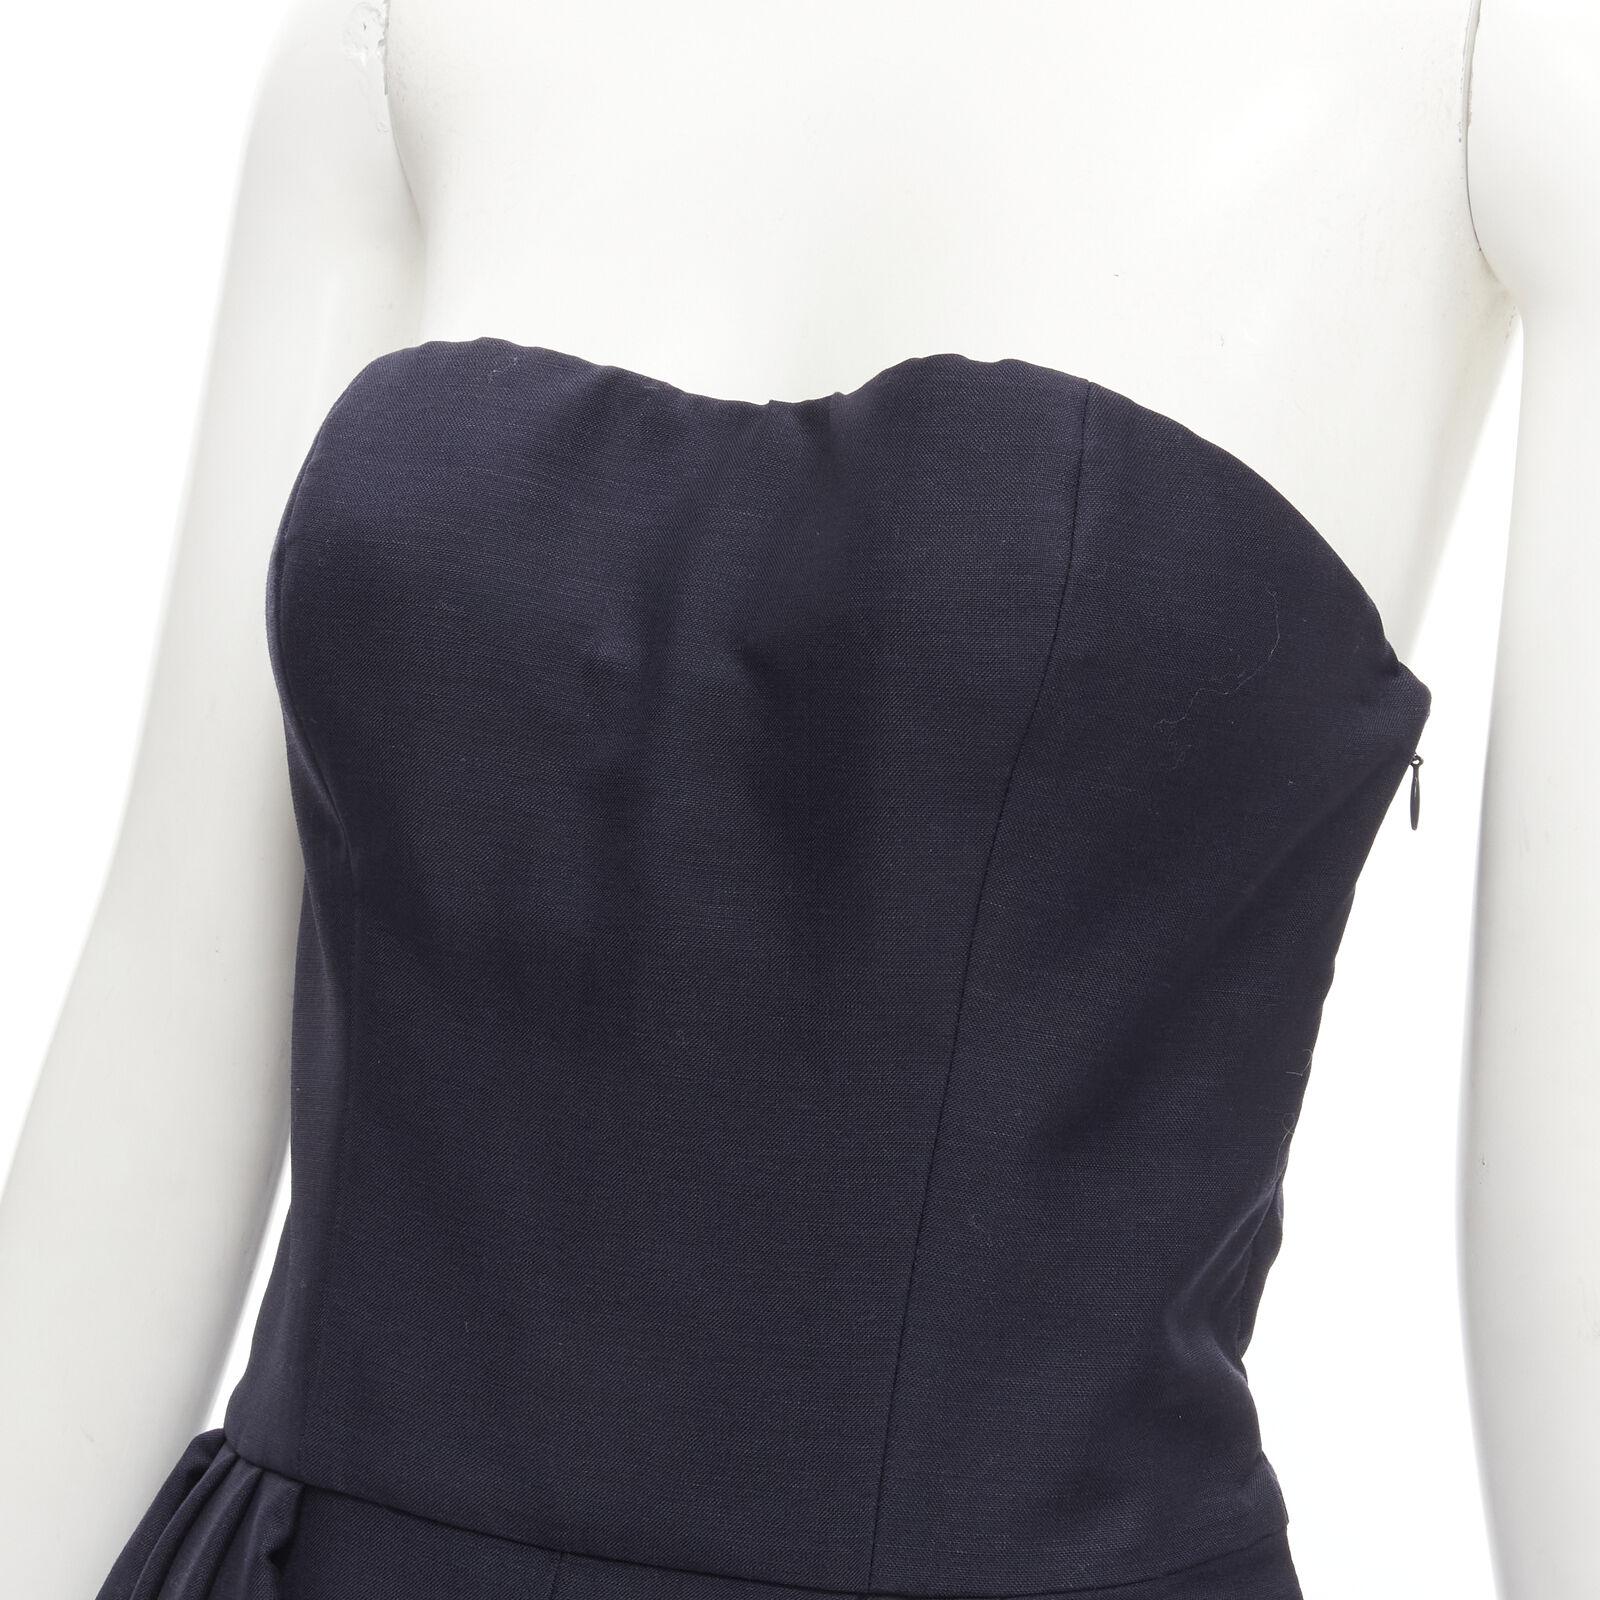 CHRISTIAN DIOR Raf Simons navy asymmetrical leg strapless corset jumpsuit FR36 S
Reference: AAWC/A00146
Brand: Christian Dior
Designer: Raf Simons
Material: Mohair, Wool
Color: Navy
Pattern: Solid
Closure: Zip
Lining: Fabric
Extra Details: White